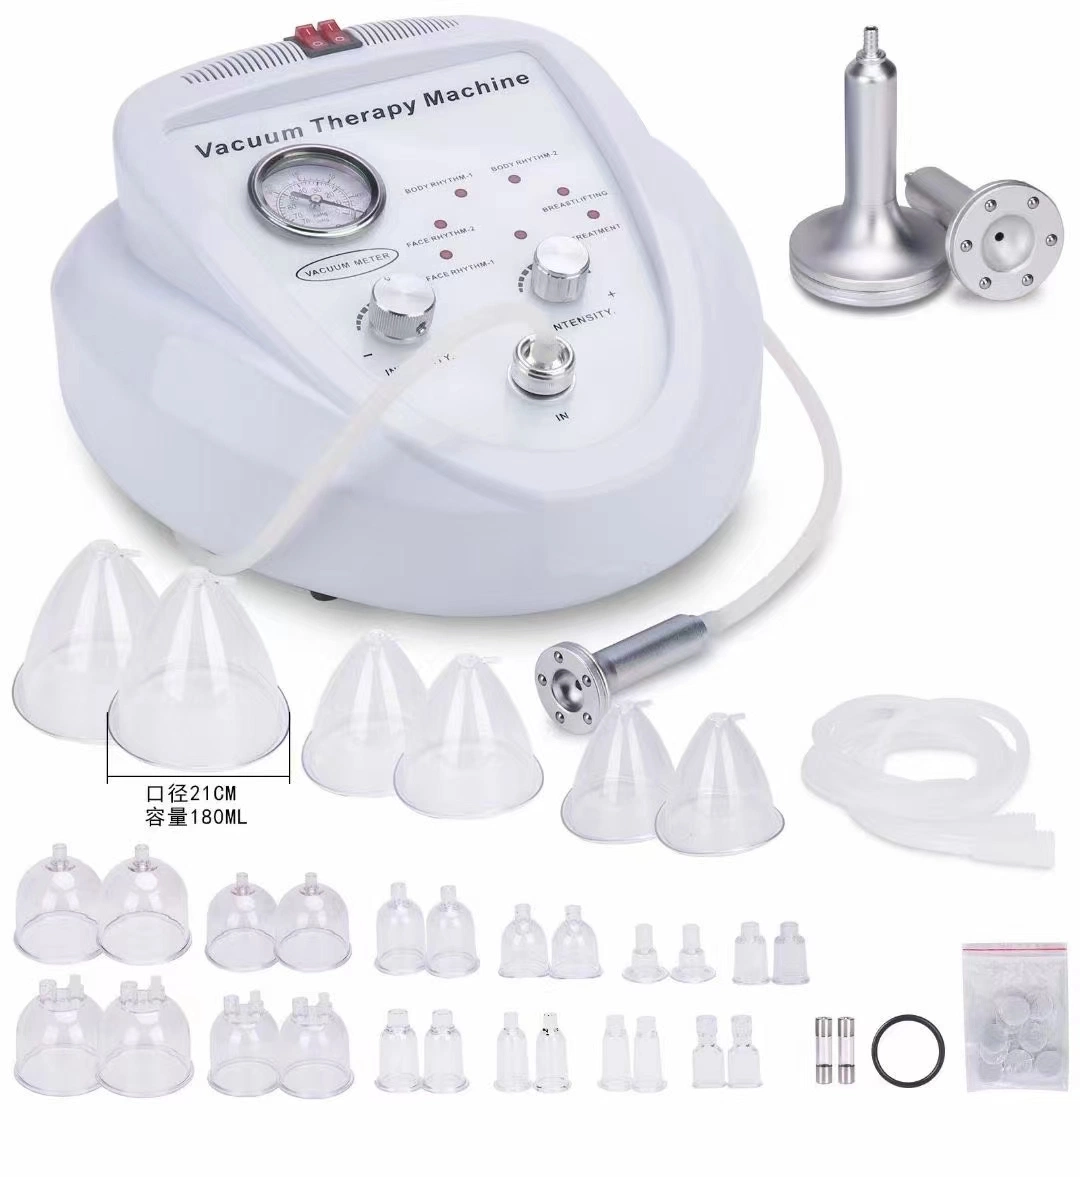 Hot Vacuum Breast Enlargement Vacuum Therapy Massager with XL Vacuup Cup for Buttocks